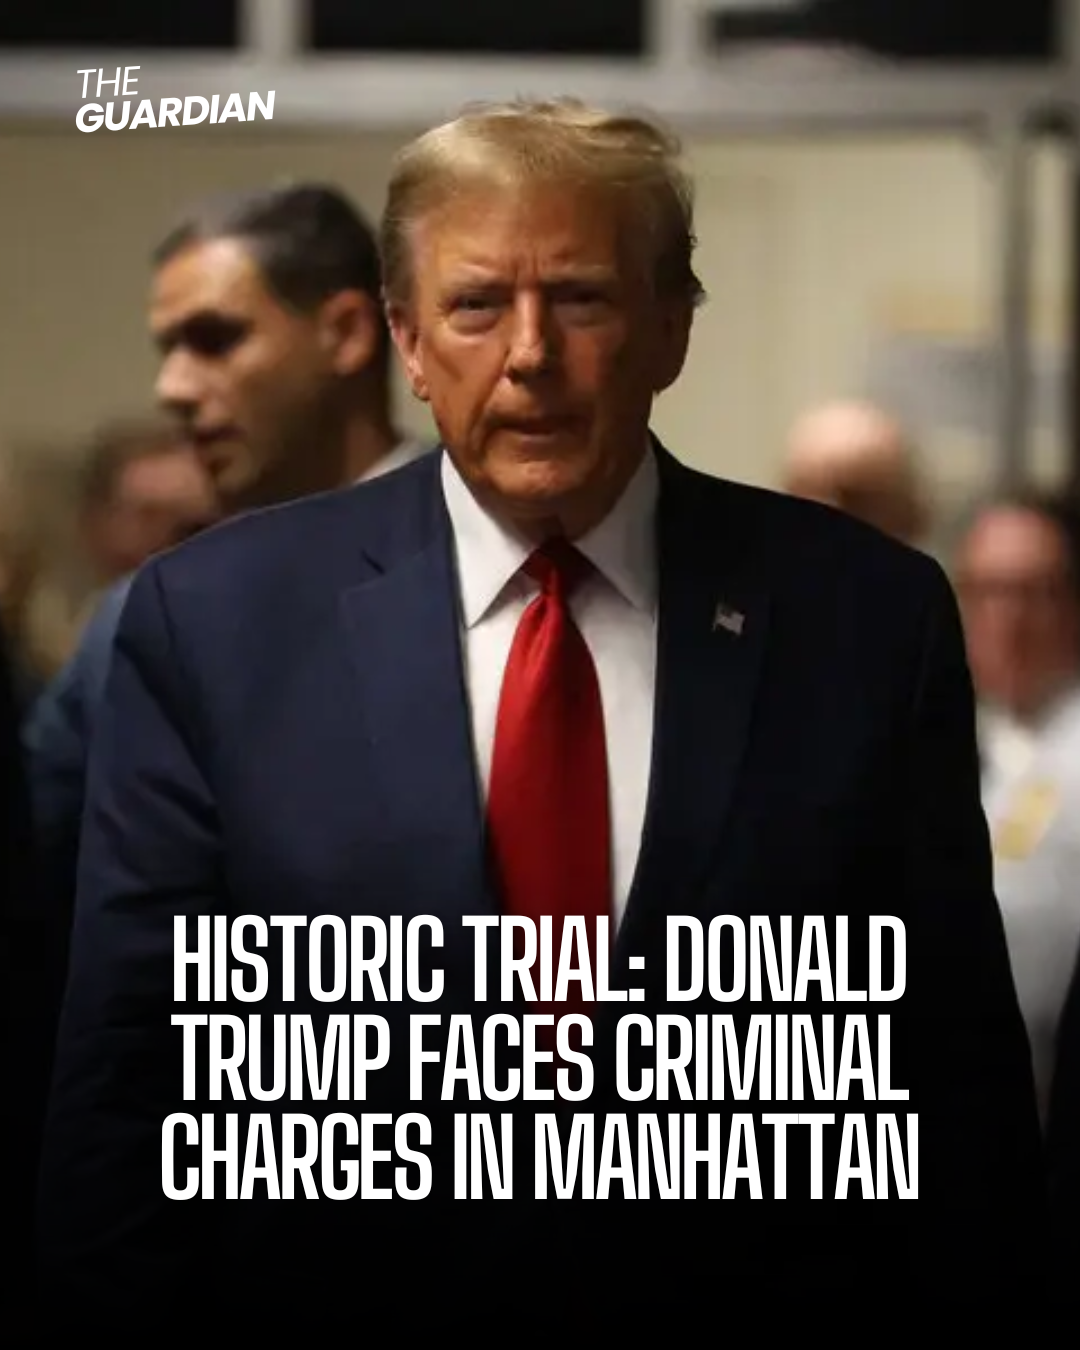 Jury selection begins in Manhattan for former President Donald Trump extraordinary criminal trial.